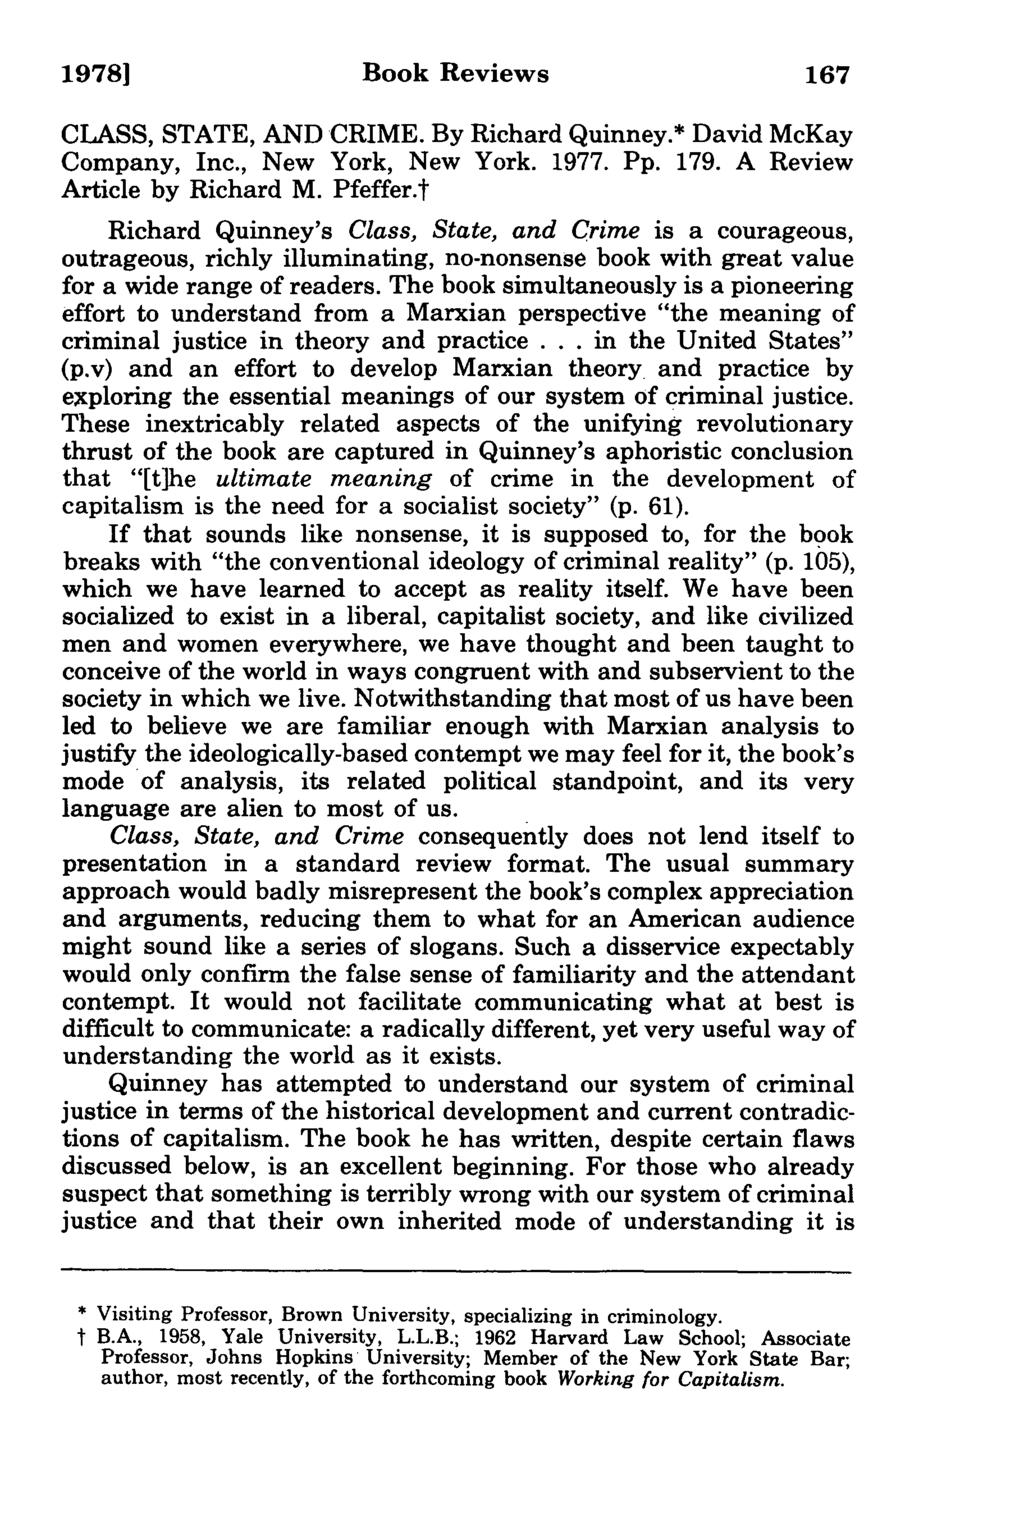 19781 Book Reviews 167 CLASS, STATE, AND CRIME. By Richard Quinney.* David McKay Company, Inc., New York, New York. 1977. Pp. 179. A Review Article by Richard M. Pfeffer.